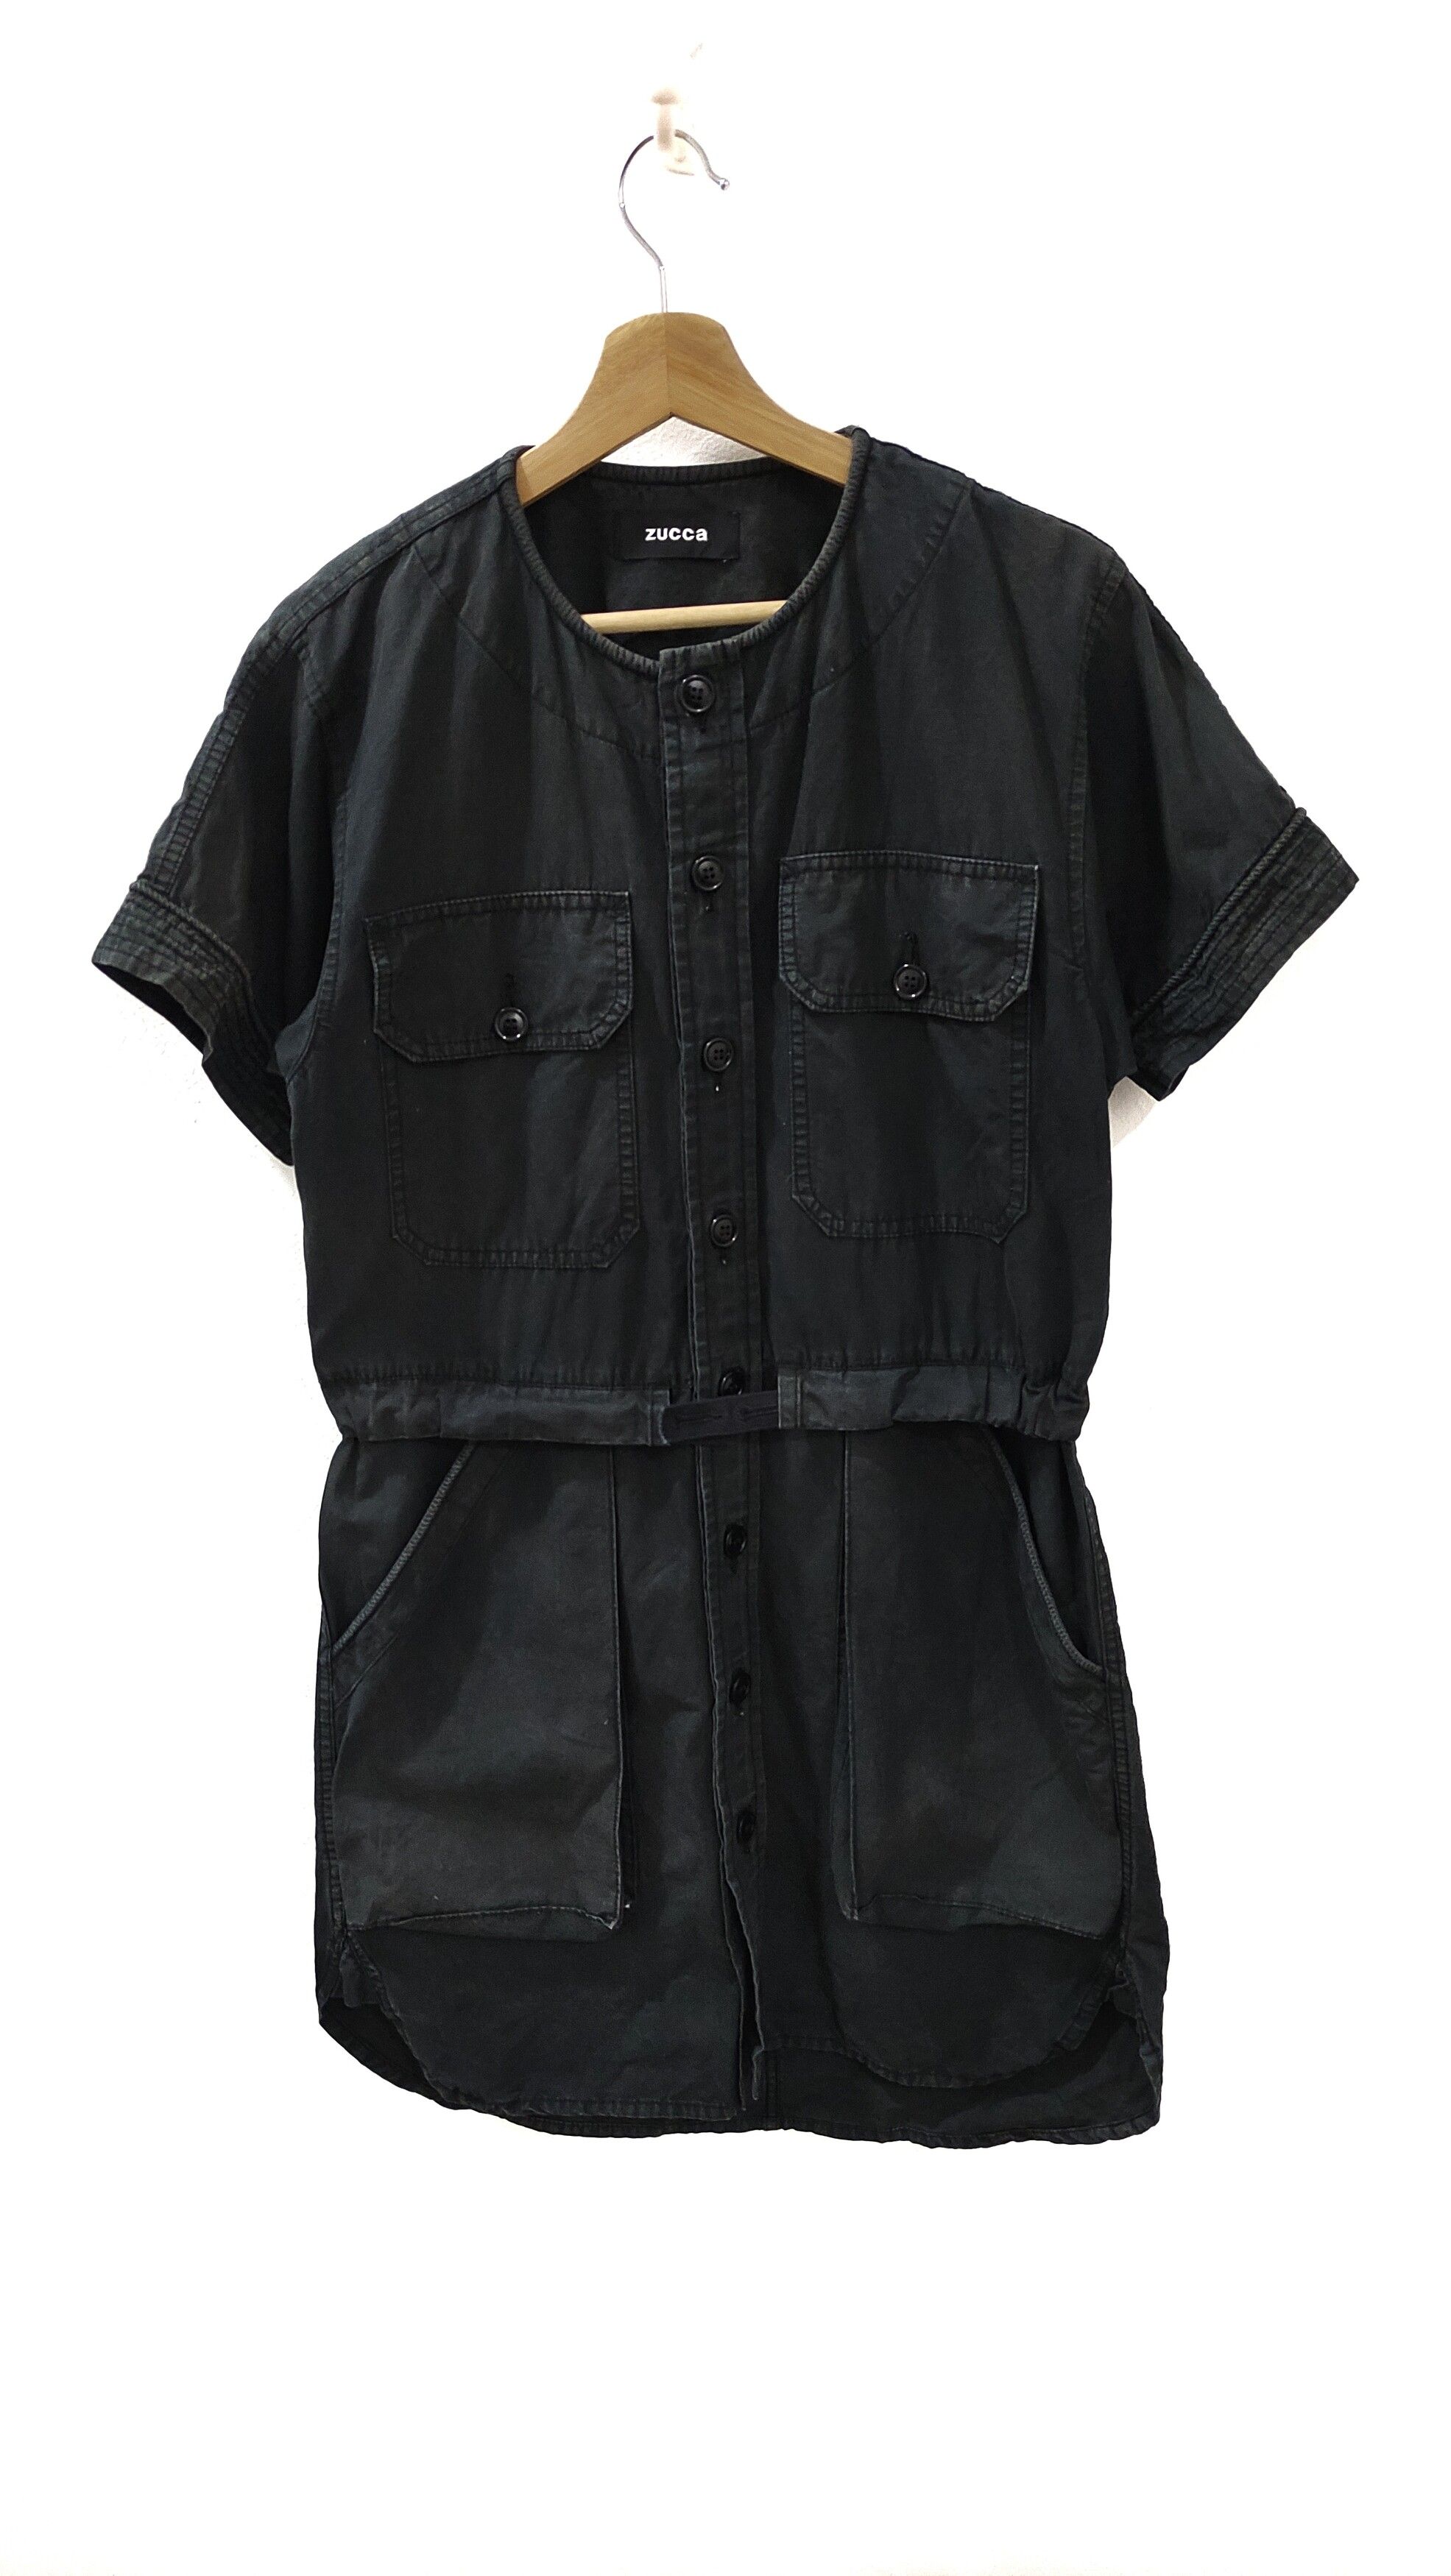 Issey Miyake Issey Miyake Zucca Multipocket Military Jumpsuit Size US M / EU 48-50 / 2 - 1 Preview